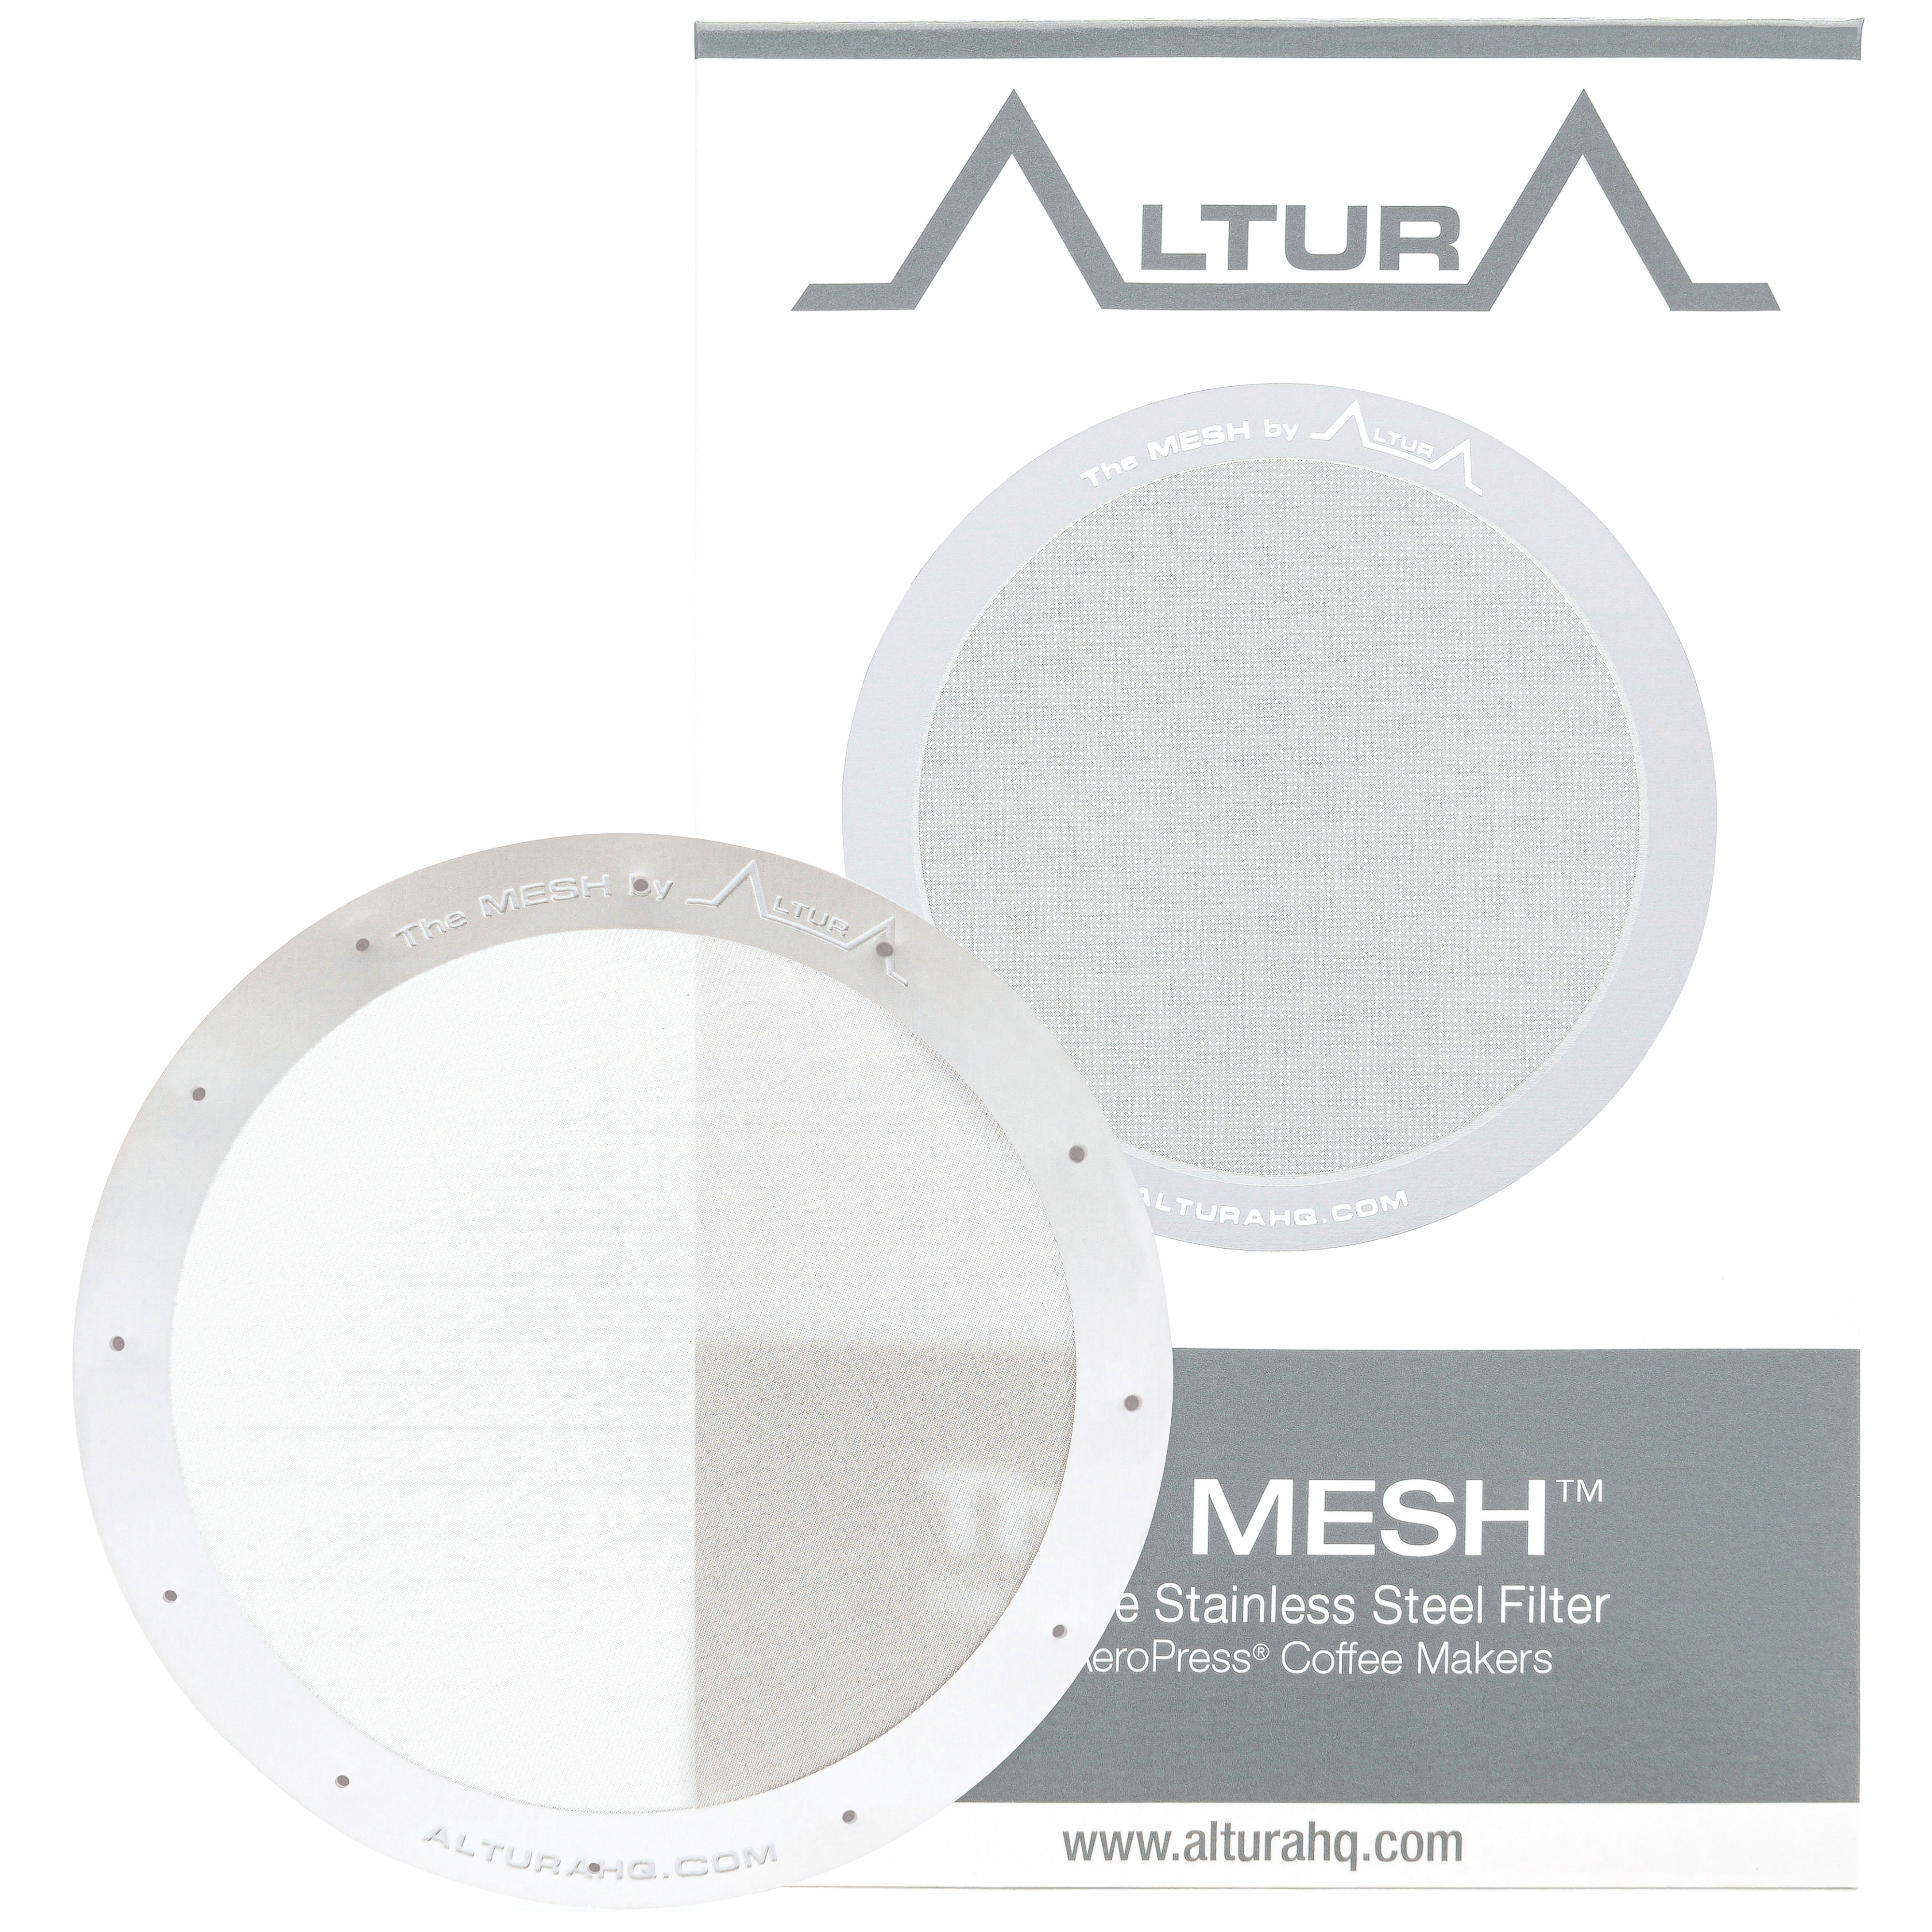 The Mesh: Premium Filter for Aeropress Coffee Makers by Altura + Free eBook with Recipes, Tips, and More – Stainless Steel, Washable & Reusable.